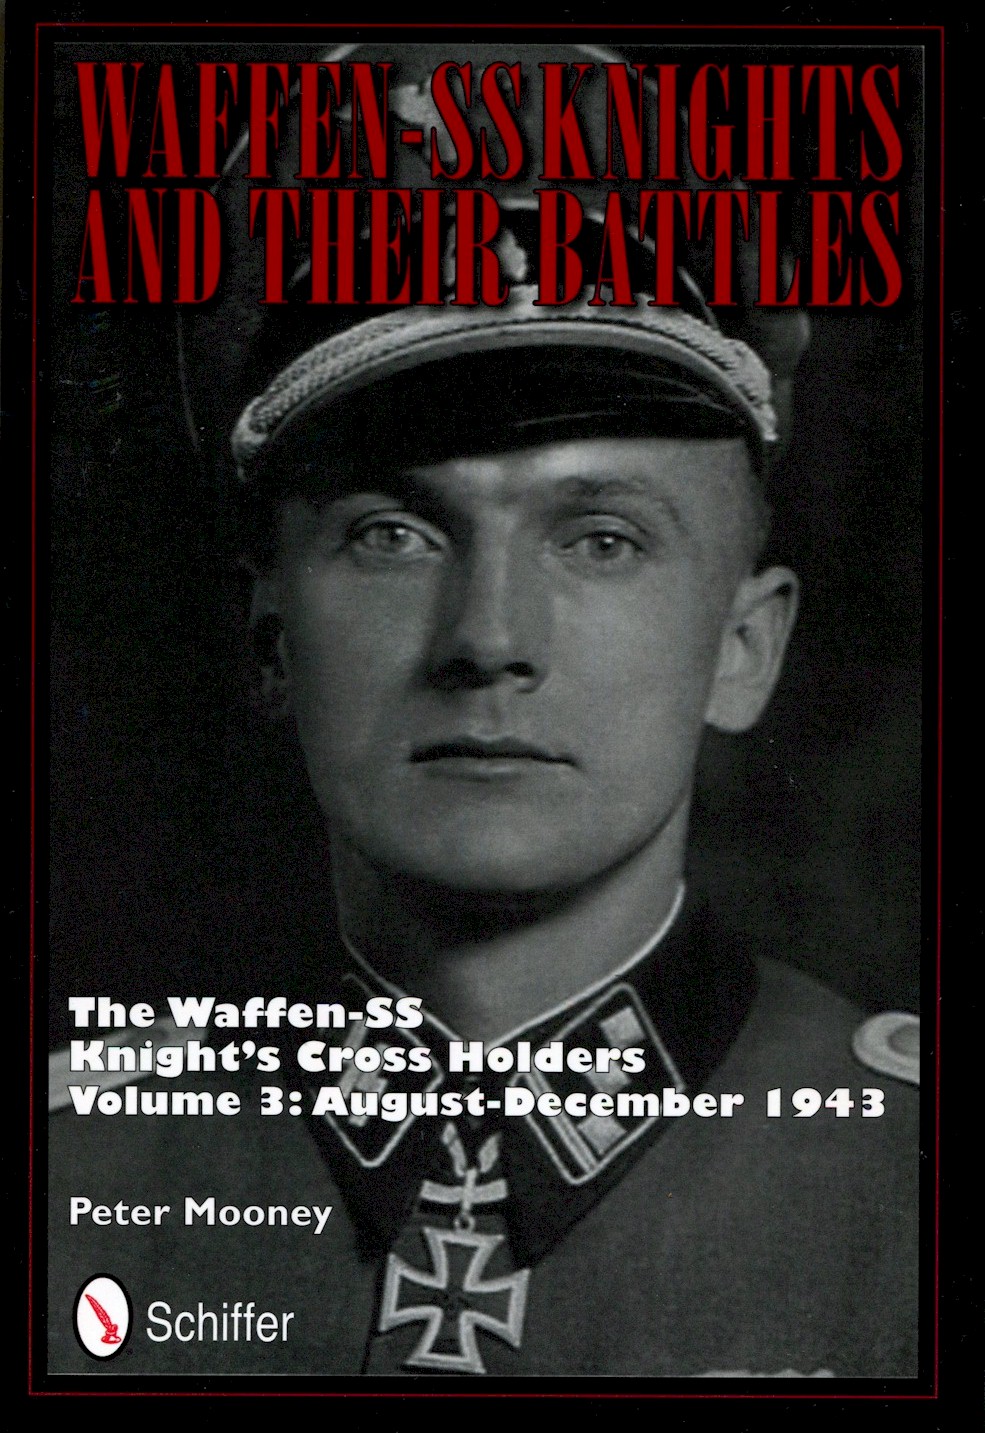 WAFFEN-SS KNIGHTS AND THEIR BATTLES: THE WAFFEN-SS KNIGHT'S CROSS HOLDERS VOL 3 : AUGUST-DECEMBER 1943 